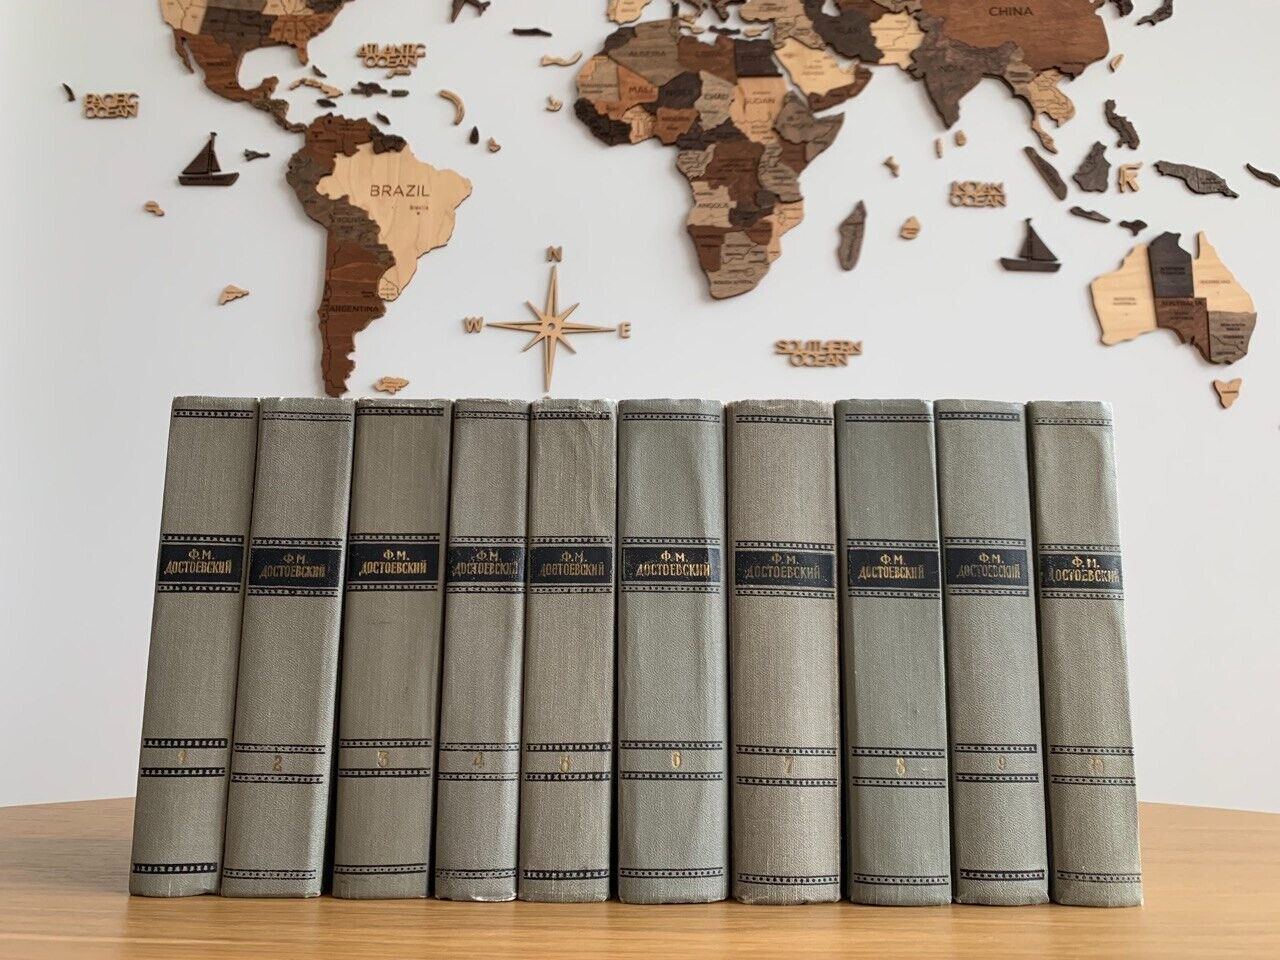 DOSTOEVSKY FYODOR | 10-volume vintage collection (1957) in Russian language